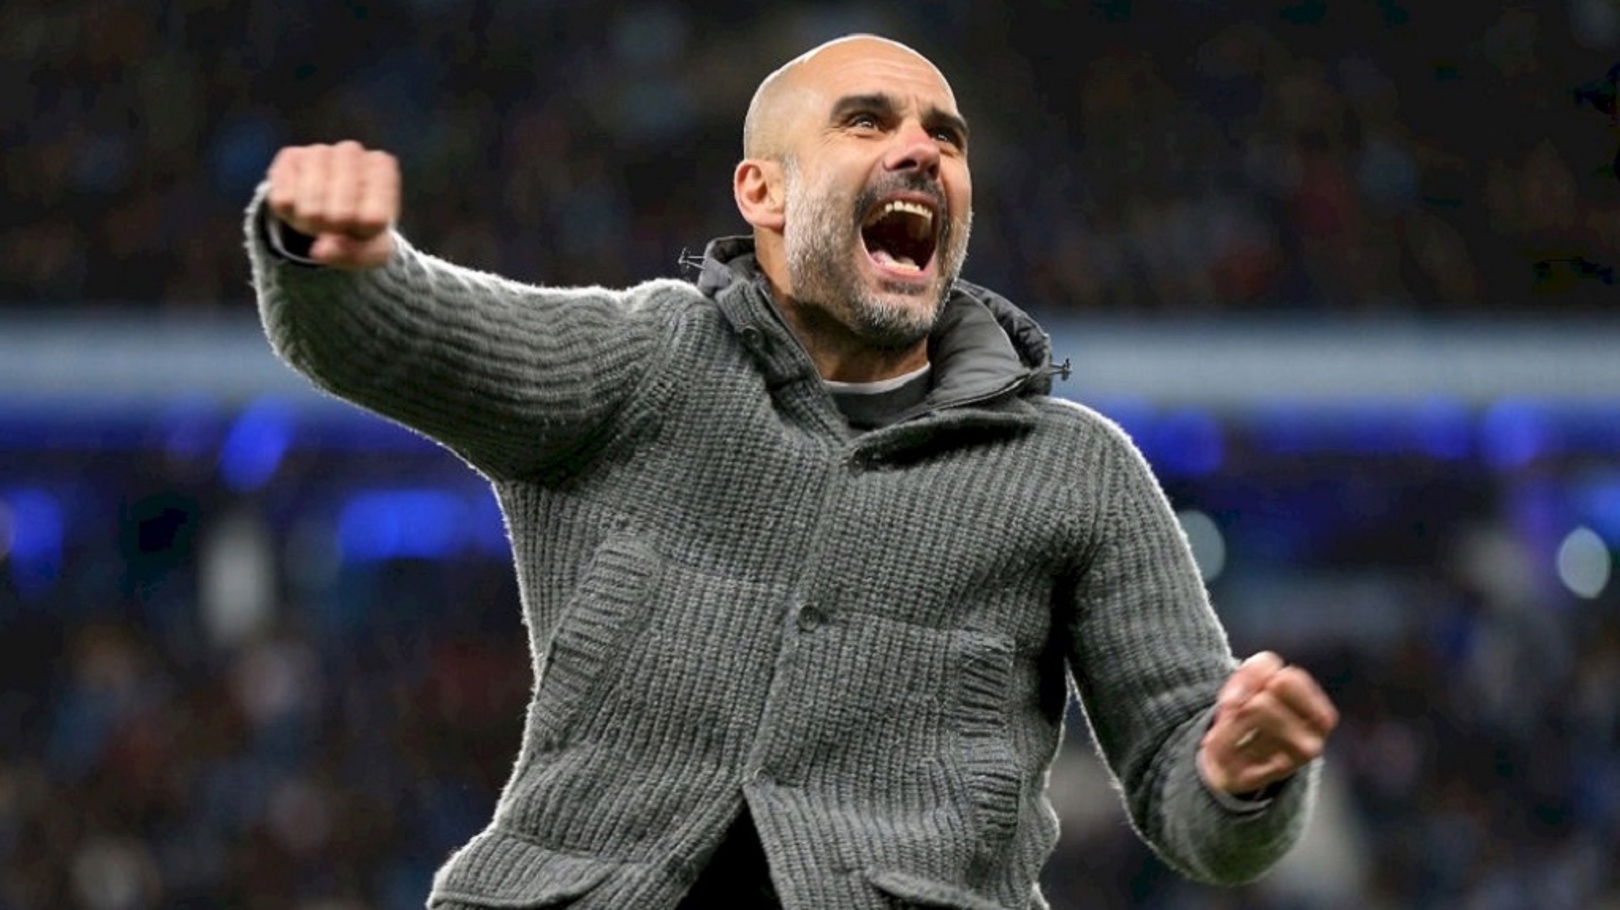 Pep Guardiola cardigan auction: The results are in